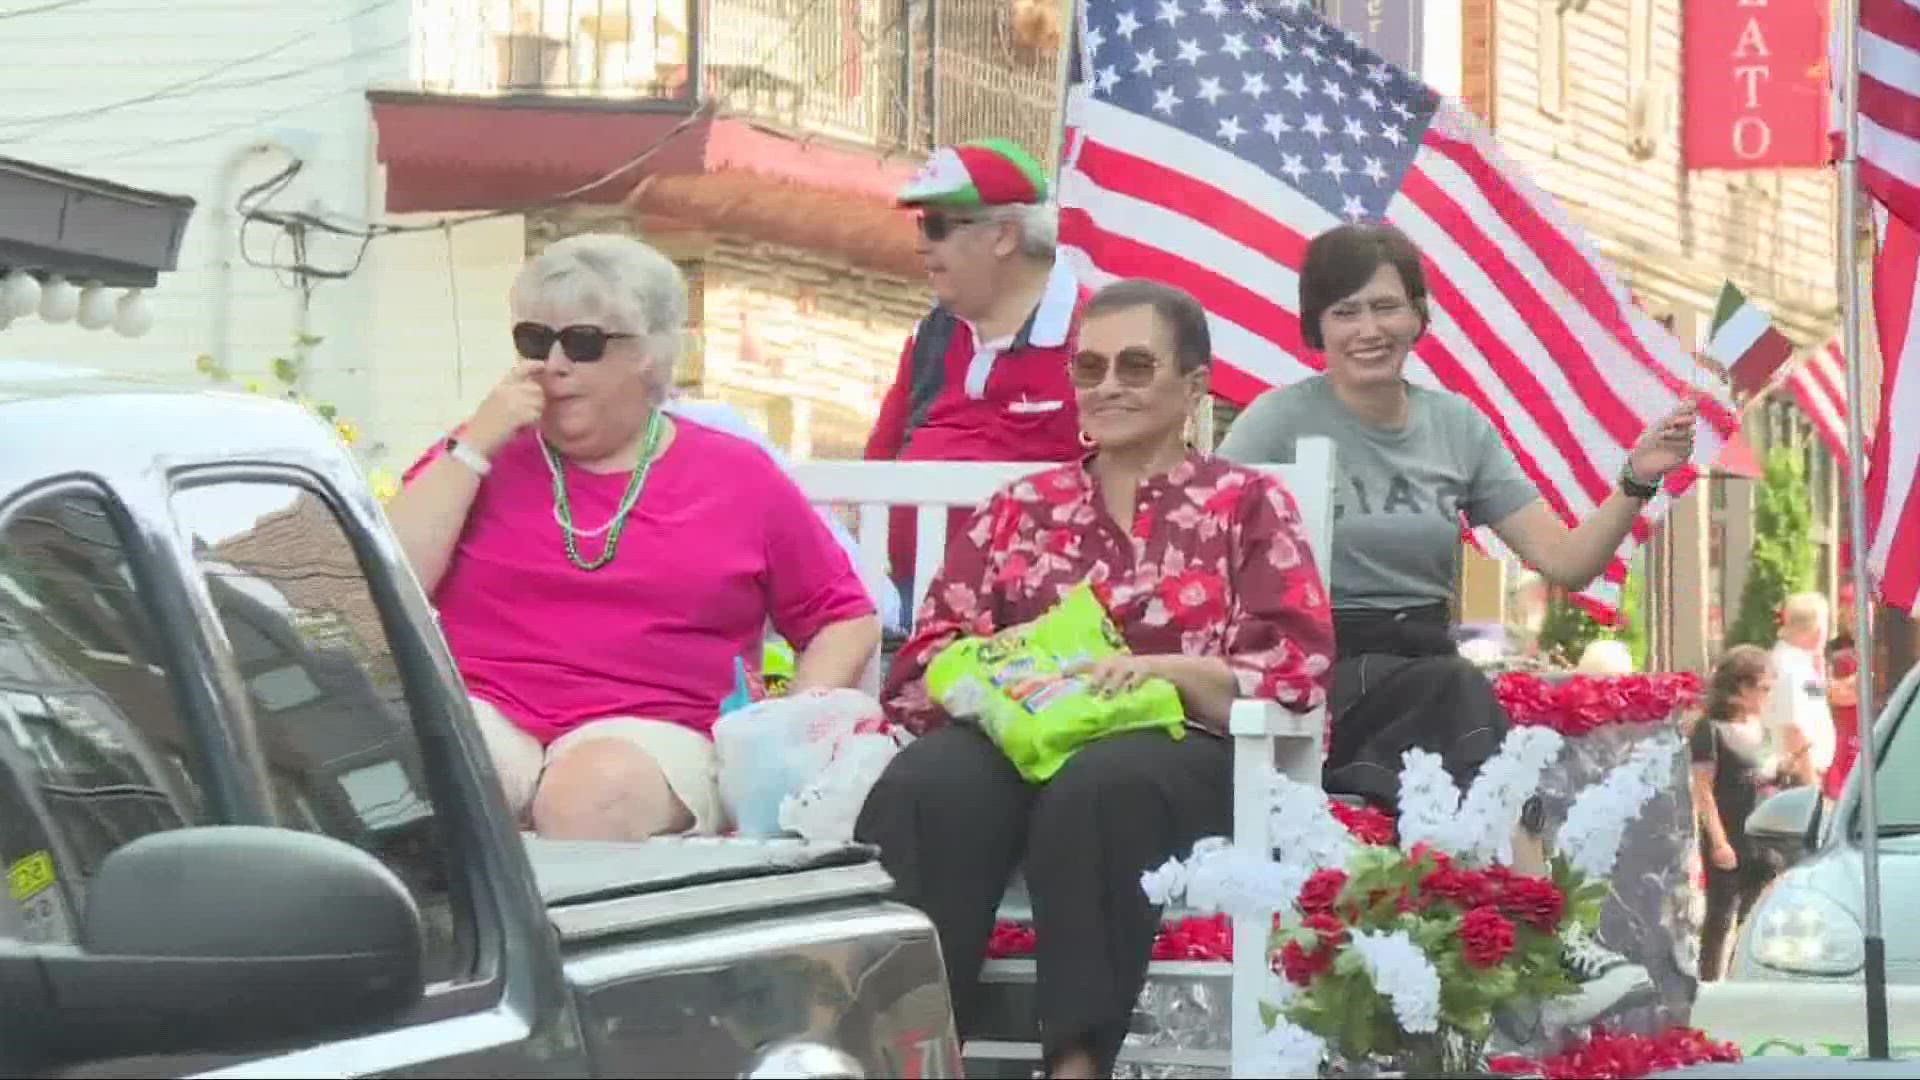 The annual Columbus Day parade was held in Little Italy. We have your front row seat to the festivities.